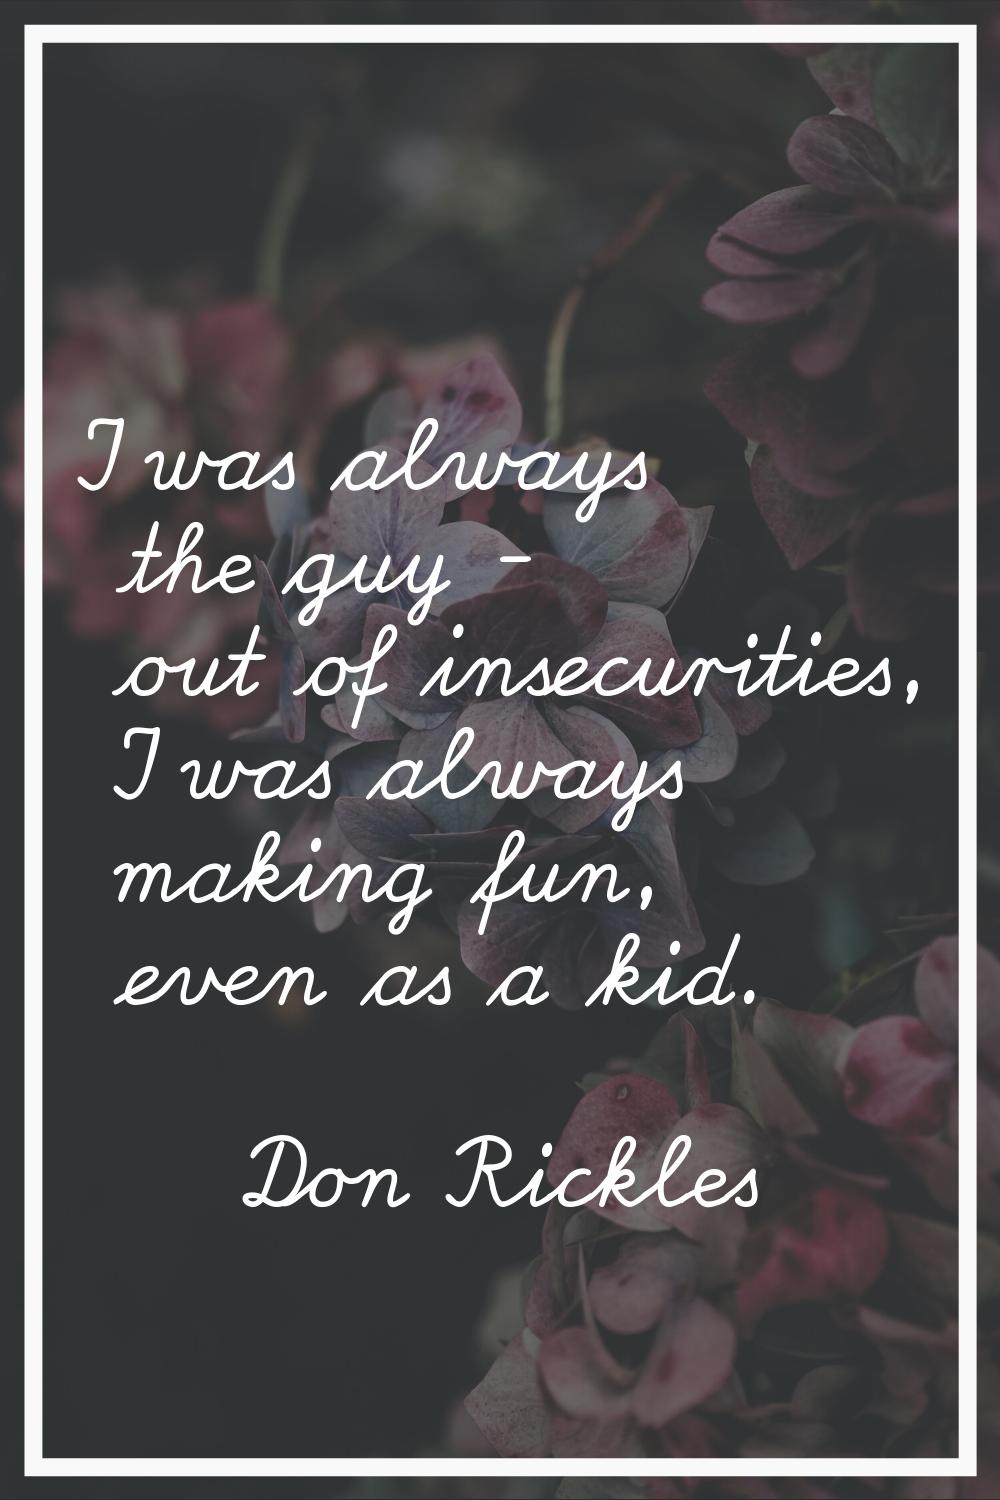 I was always the guy - out of insecurities, I was always making fun, even as a kid.